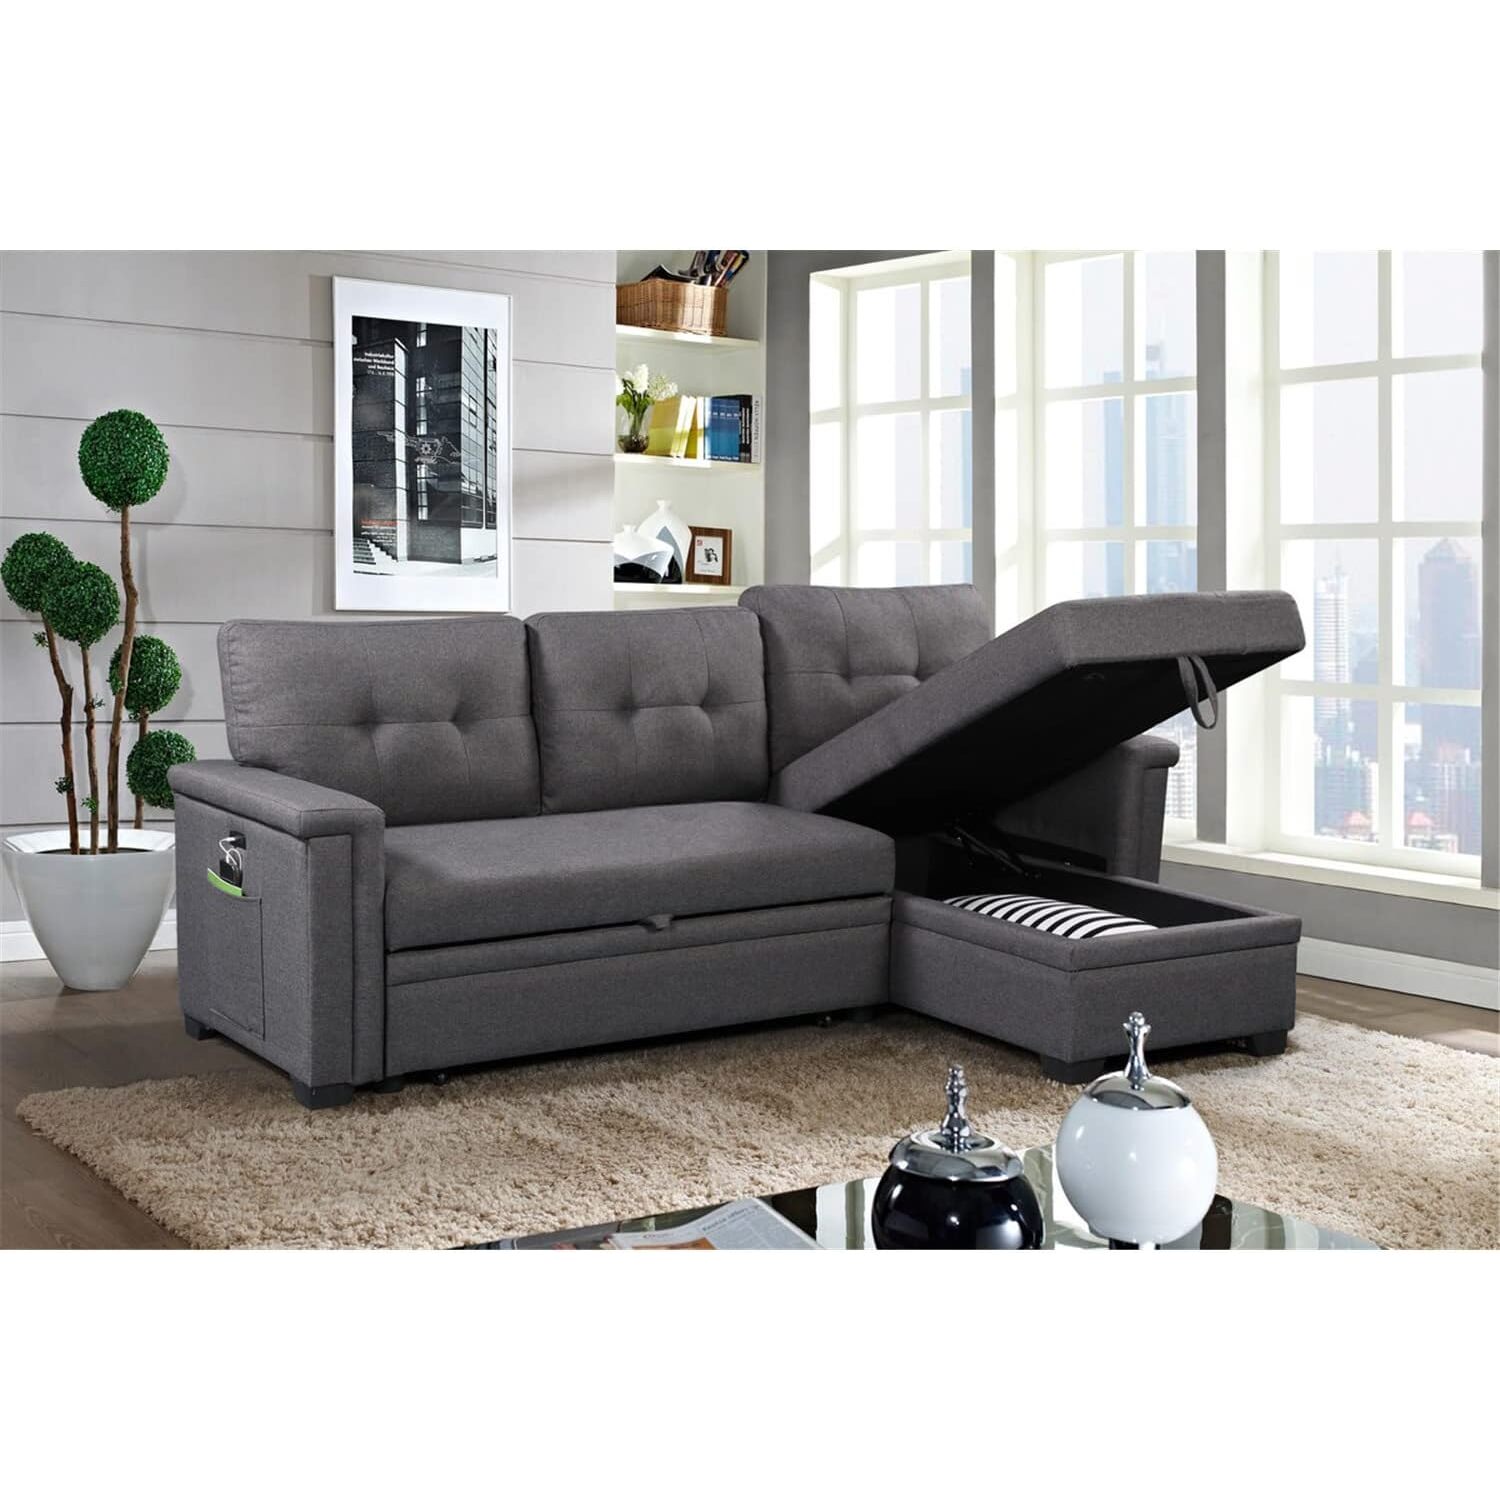 Lilola Home Sectional Sofa, Gray Cotton Blend - image 5 of 9